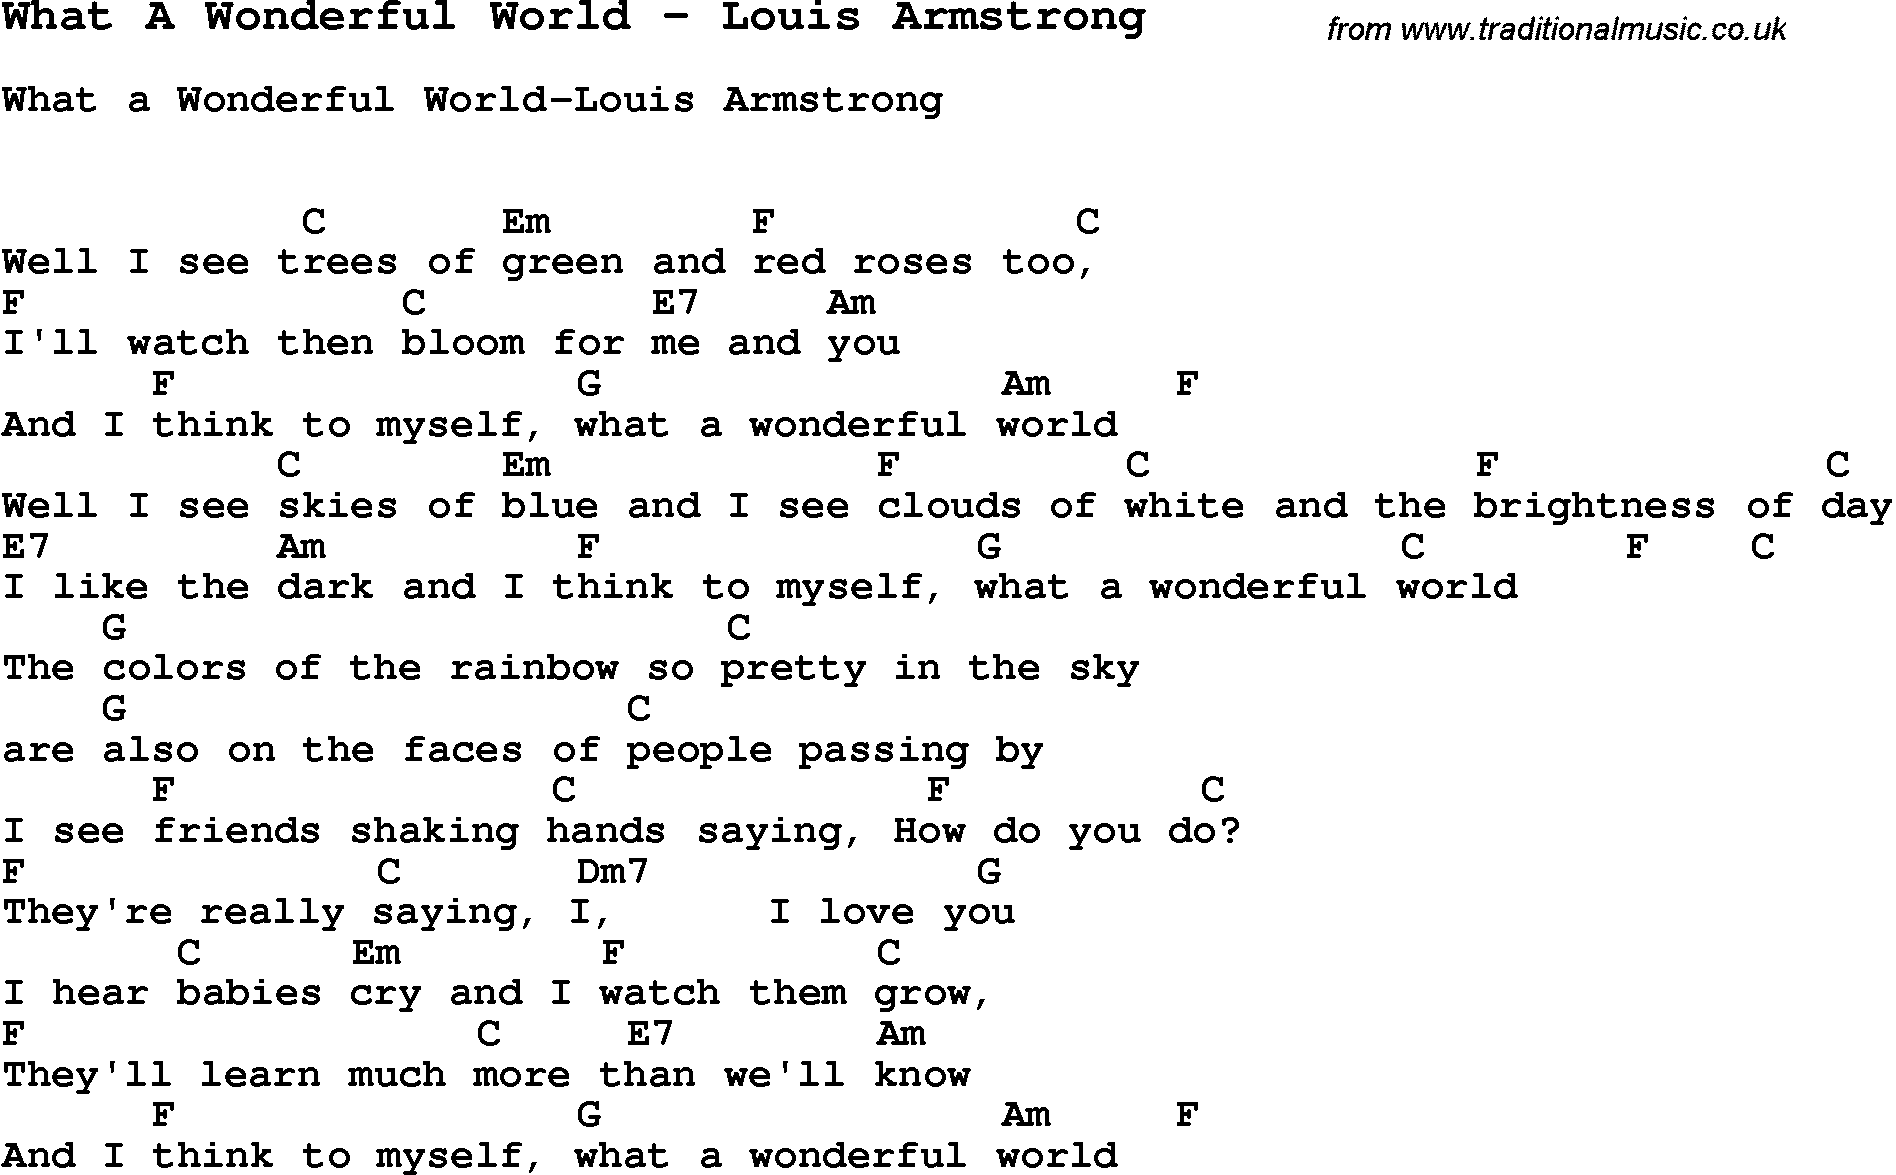 Song What A Wonderful World by Louis Armstrong, with lyrics for vocal performance and accompaniment chords for Ukulele, Guitar Banjo etc.